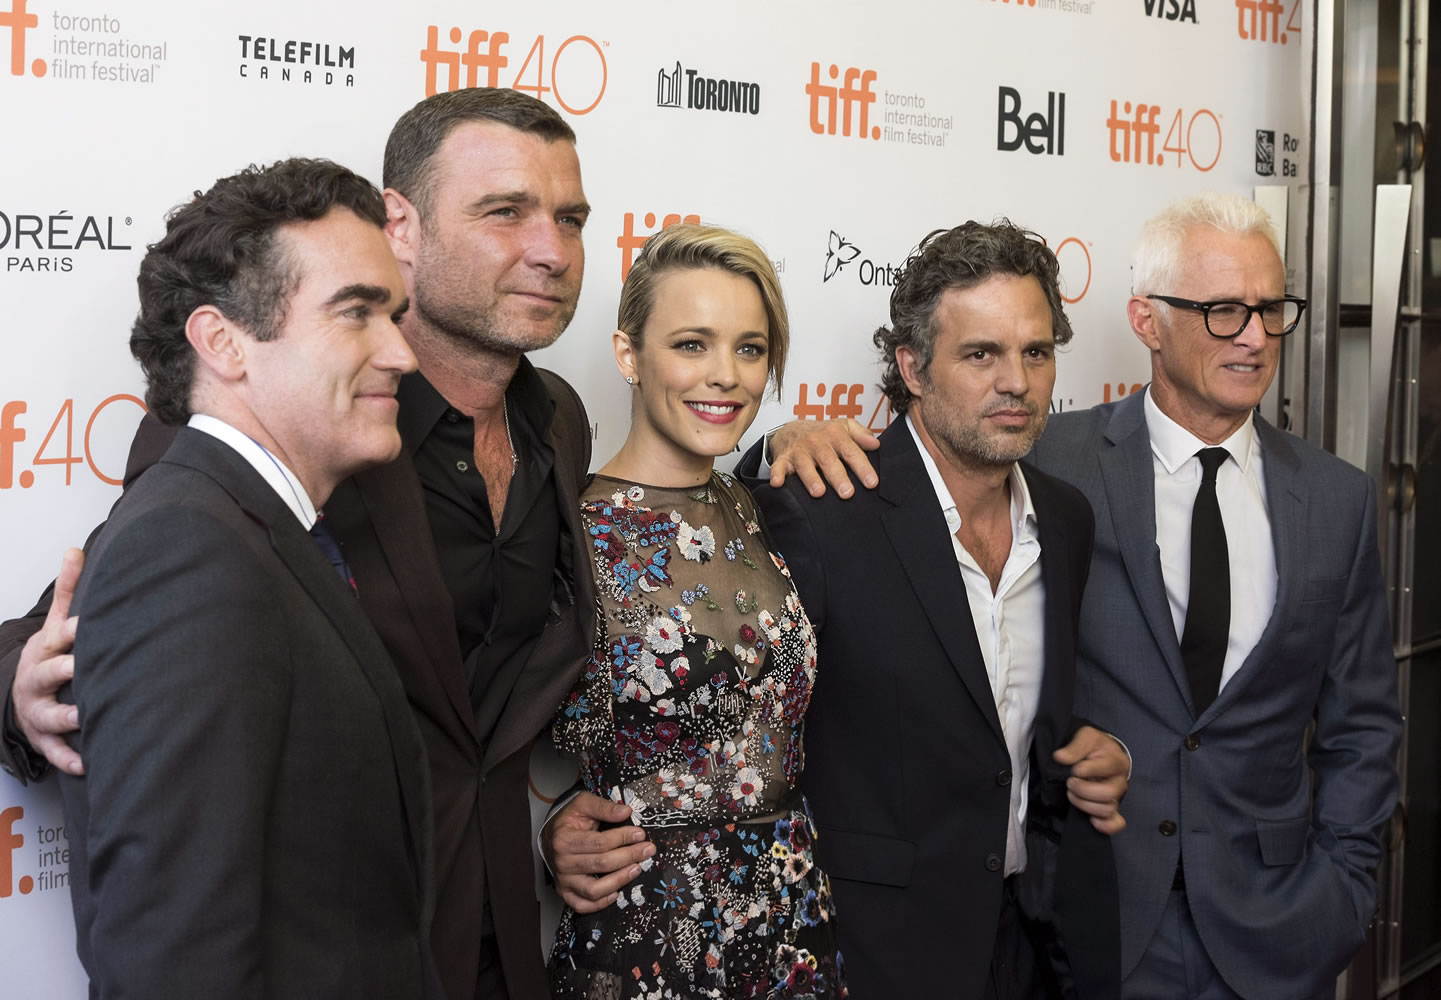 Brian d'Arcy James, from left, Liev Schreiber, Rachel McAdams, Mark Ruffalo, and John Slattery pose for photos on the red carpet for the film "Spotlight" during the 2015 Toronto International Film Festival on Monday.